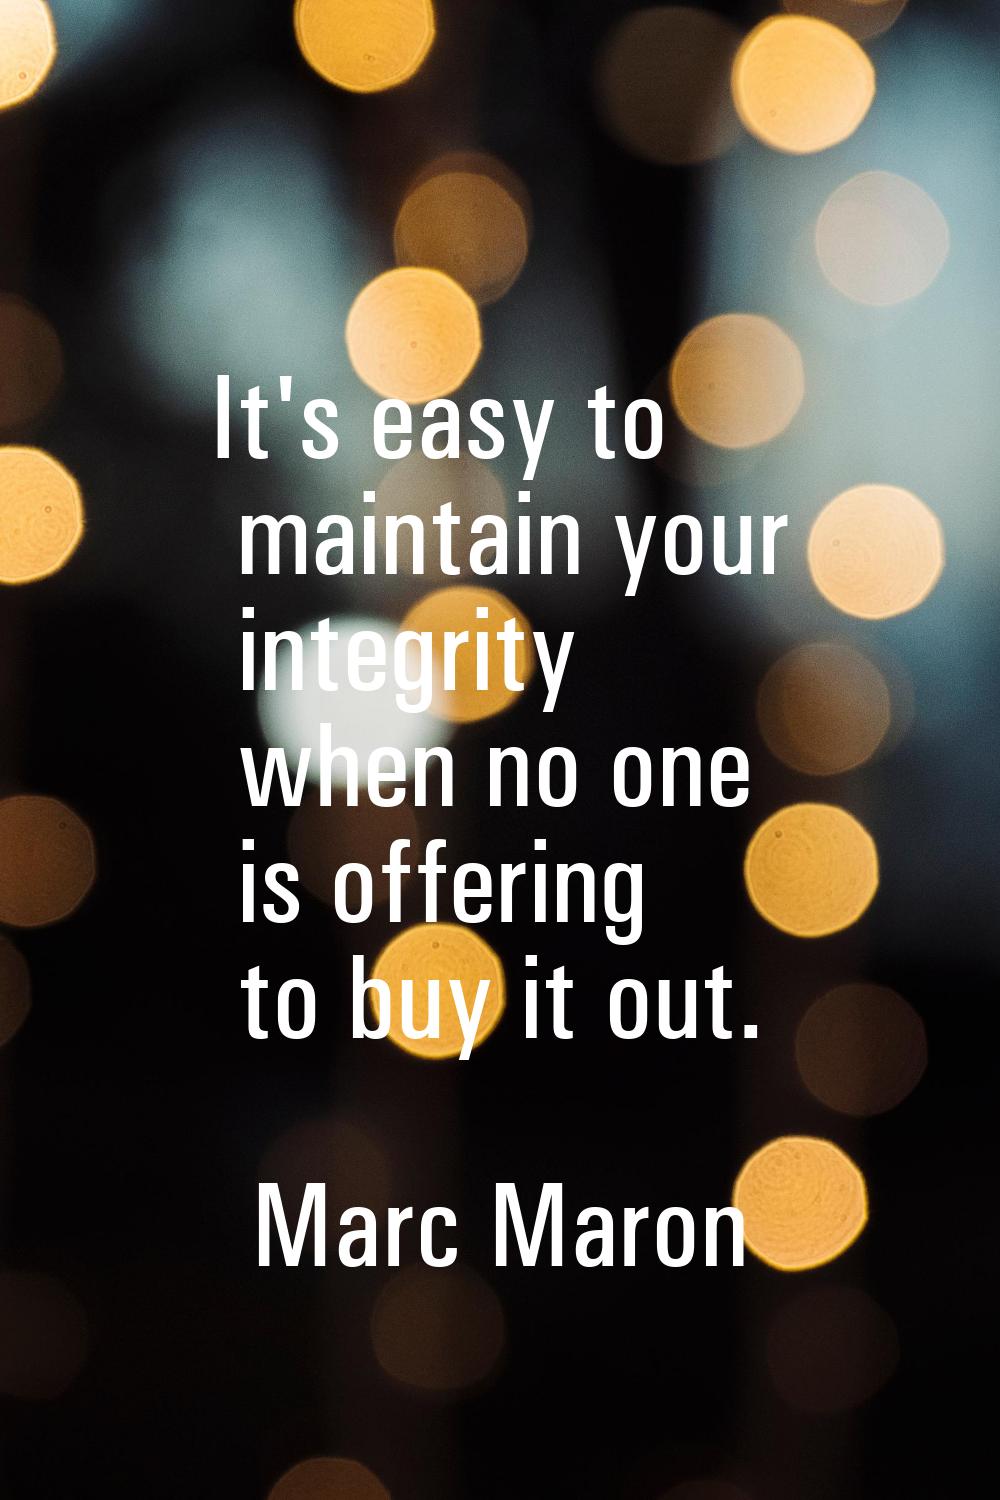 It's easy to maintain your integrity when no one is offering to buy it out.